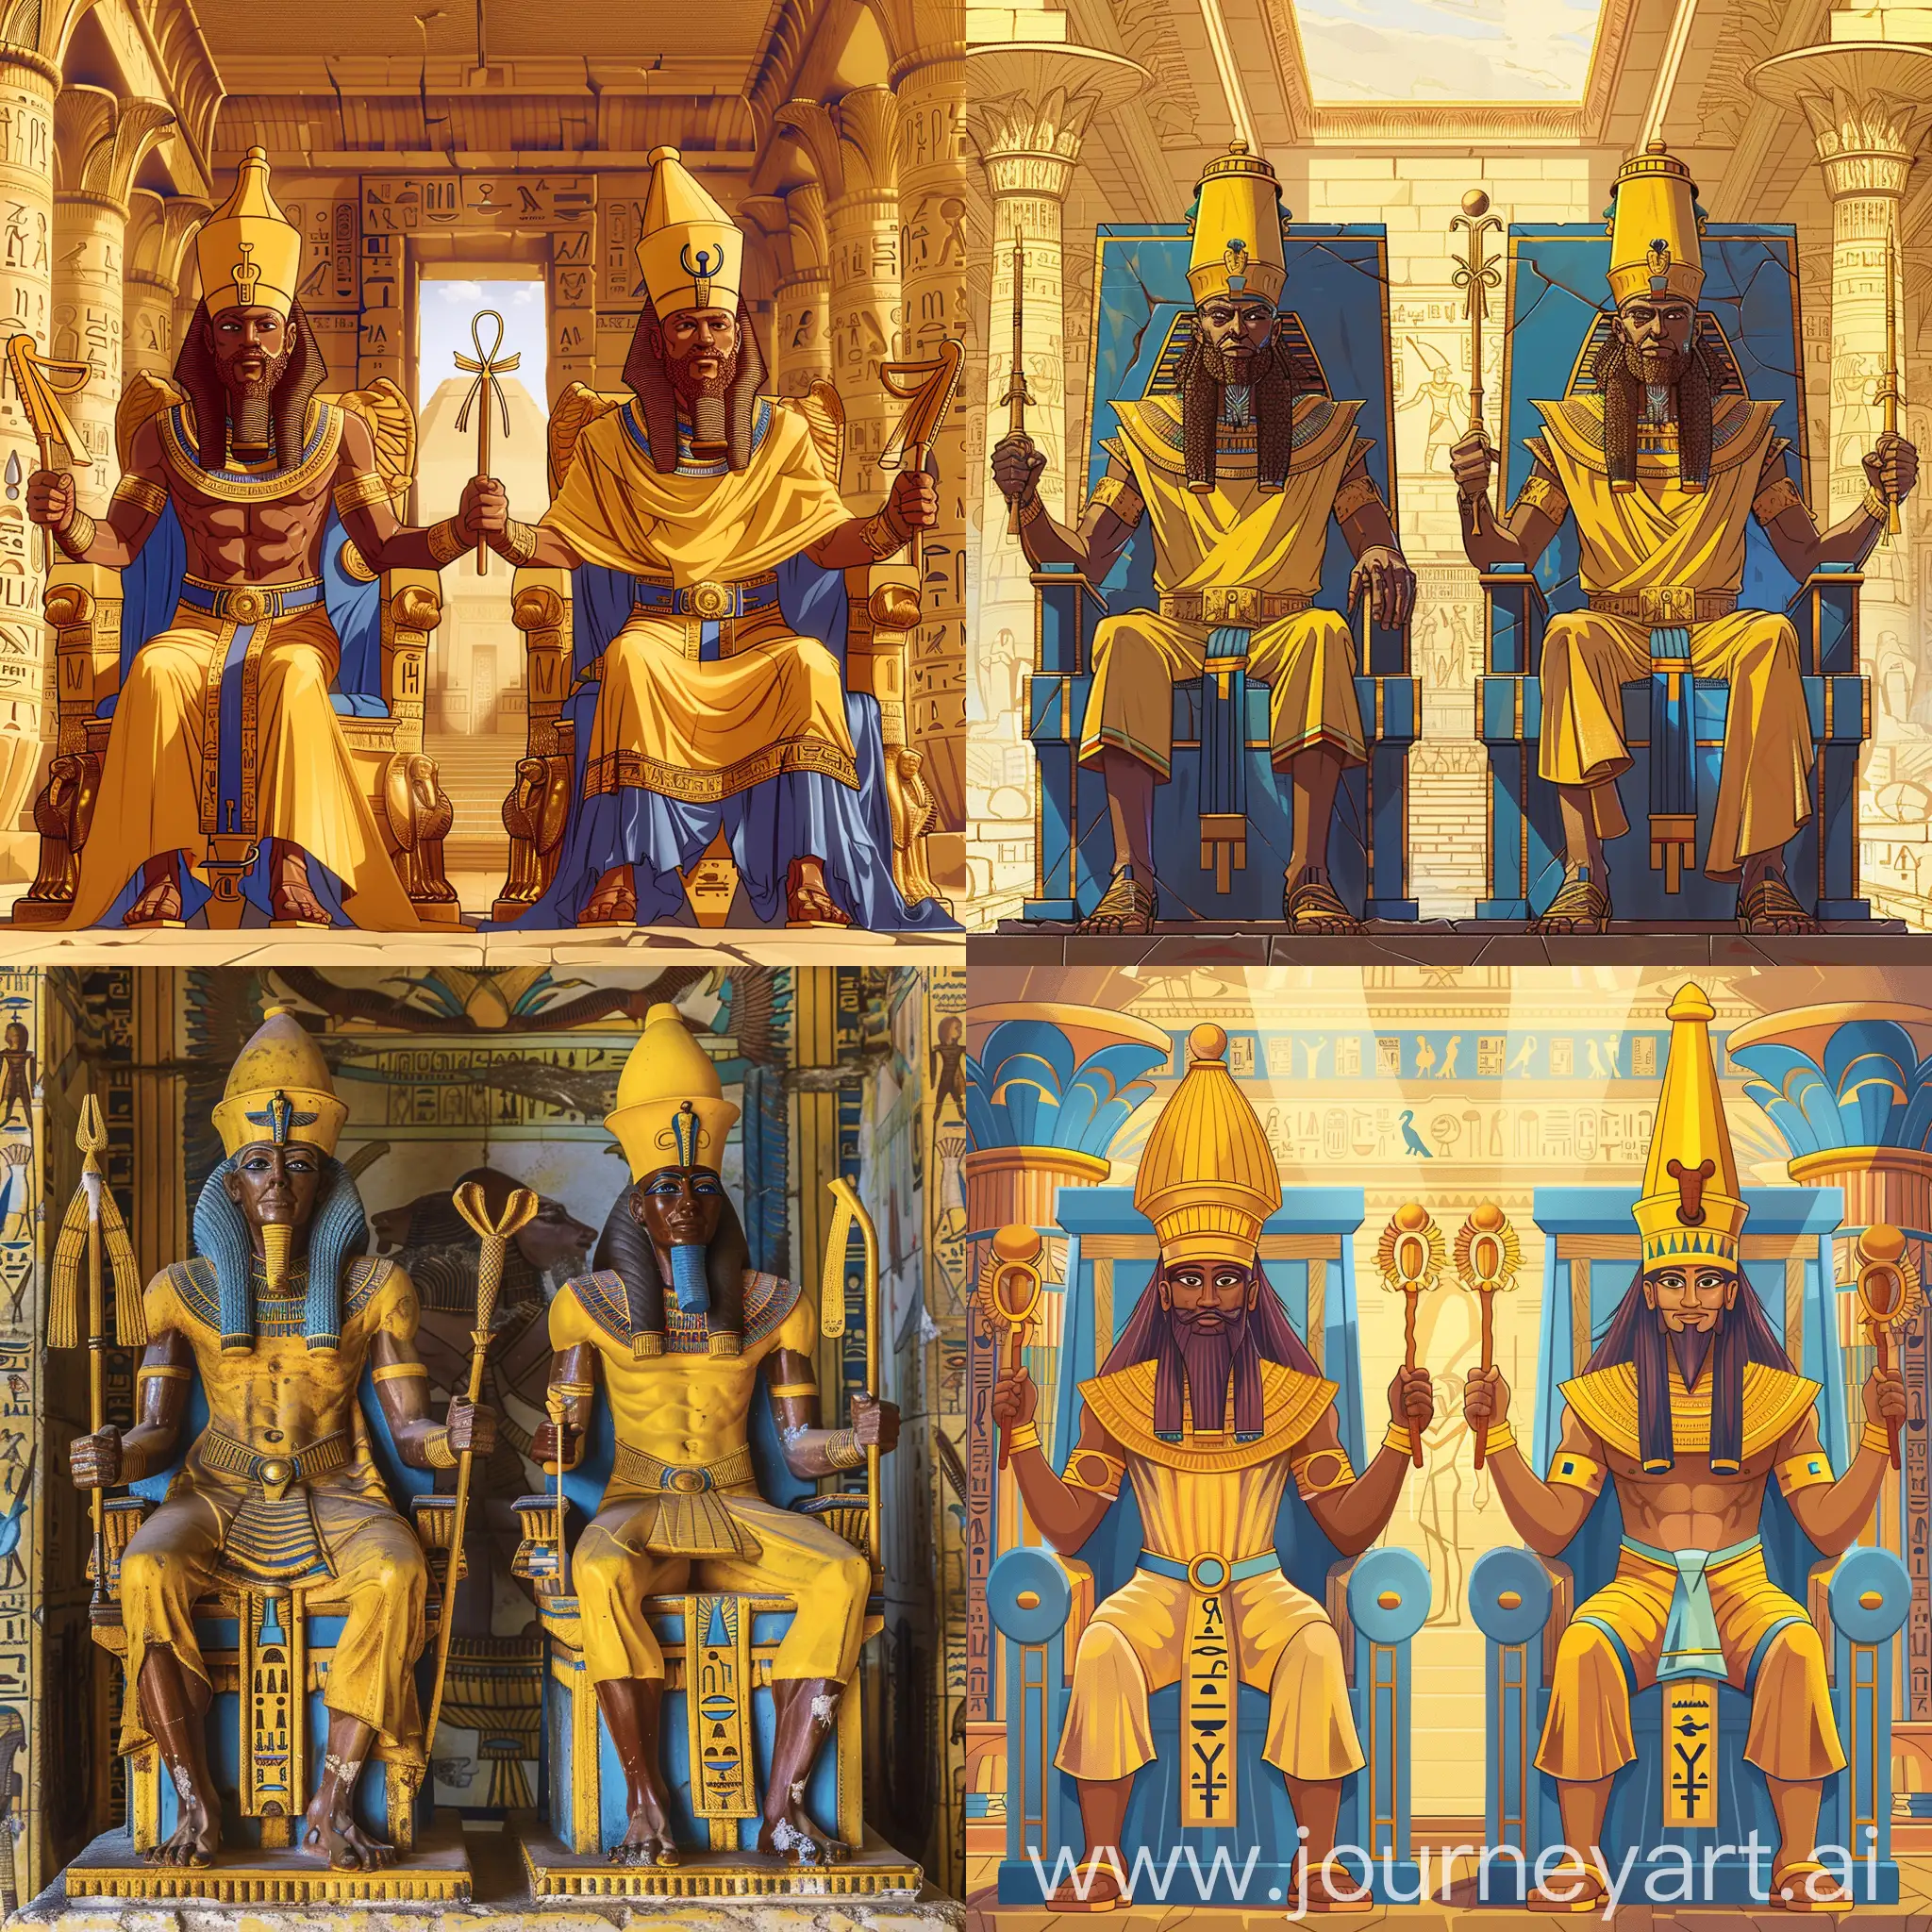 at left, a brown skin Egyptian god Atum, with Egyptian style beard and pharaoh hat, sits on his imperial throne,

at right, another brown skin Egyptian god Amun, with Egyptian beard and Egyptian long yellow royal hat,  sits on his imperial throne,

they both hold royal wands with ankh symbol in their hands, theirs clothes are in yellow blue color,

they are all inside a splendid Egyptian temple,